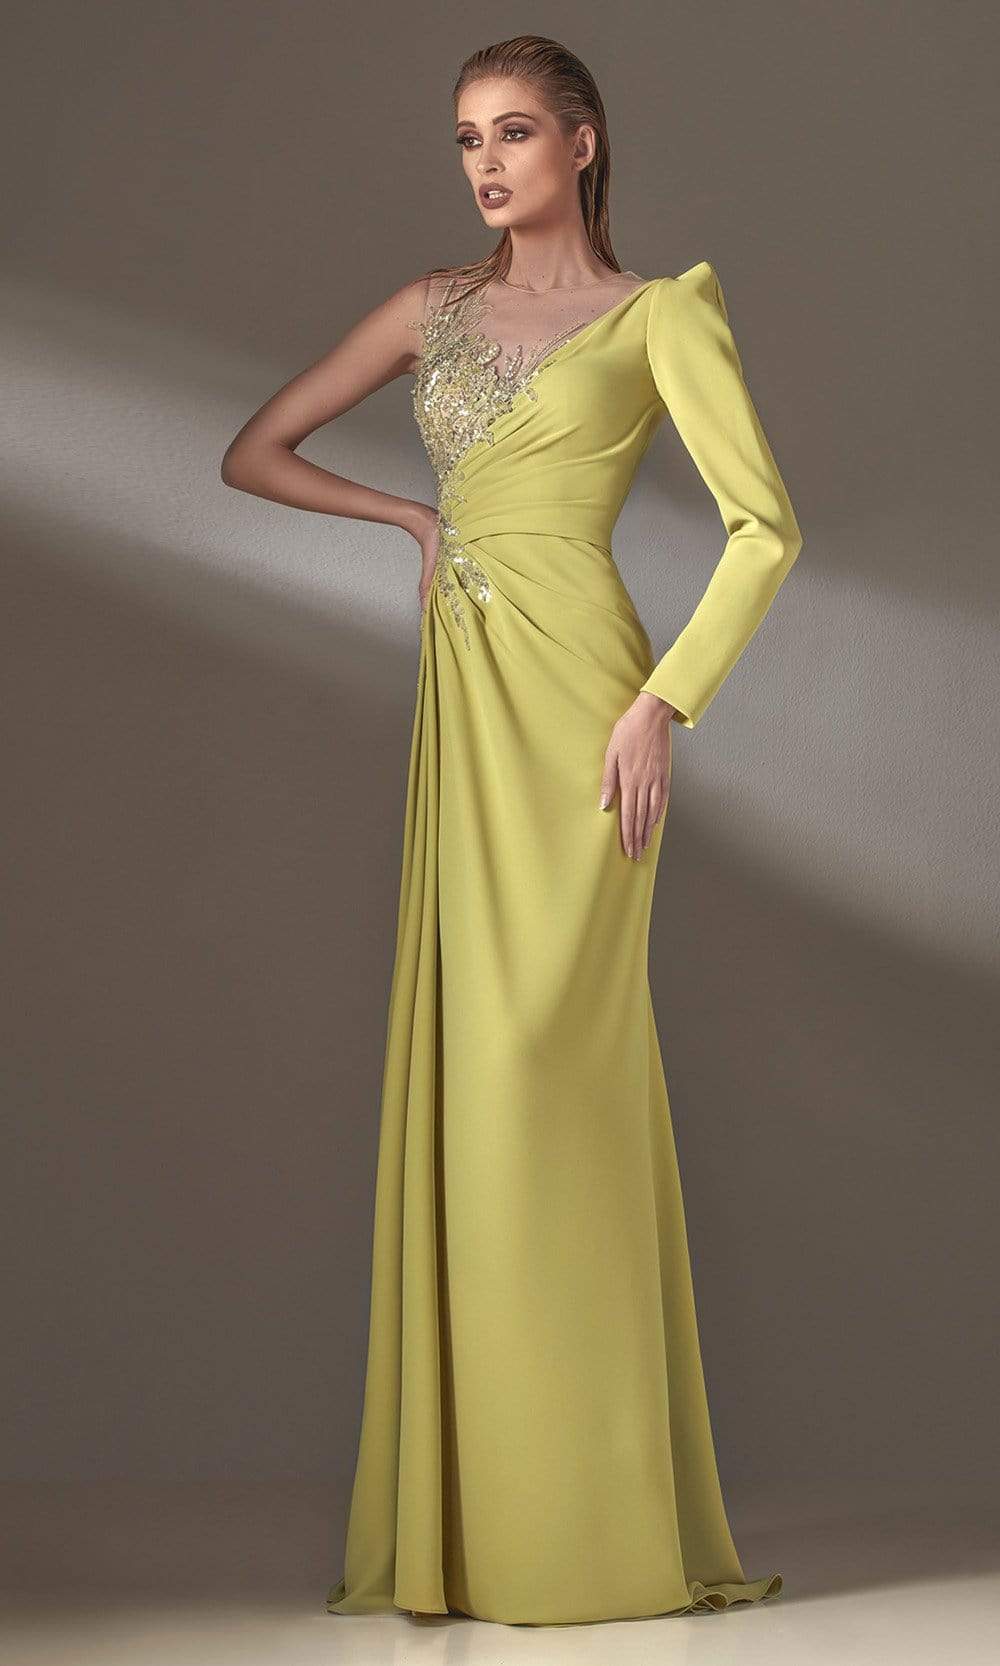 Image of MNM Couture - K3908 Illusion Jewel A-Line Evening Dress